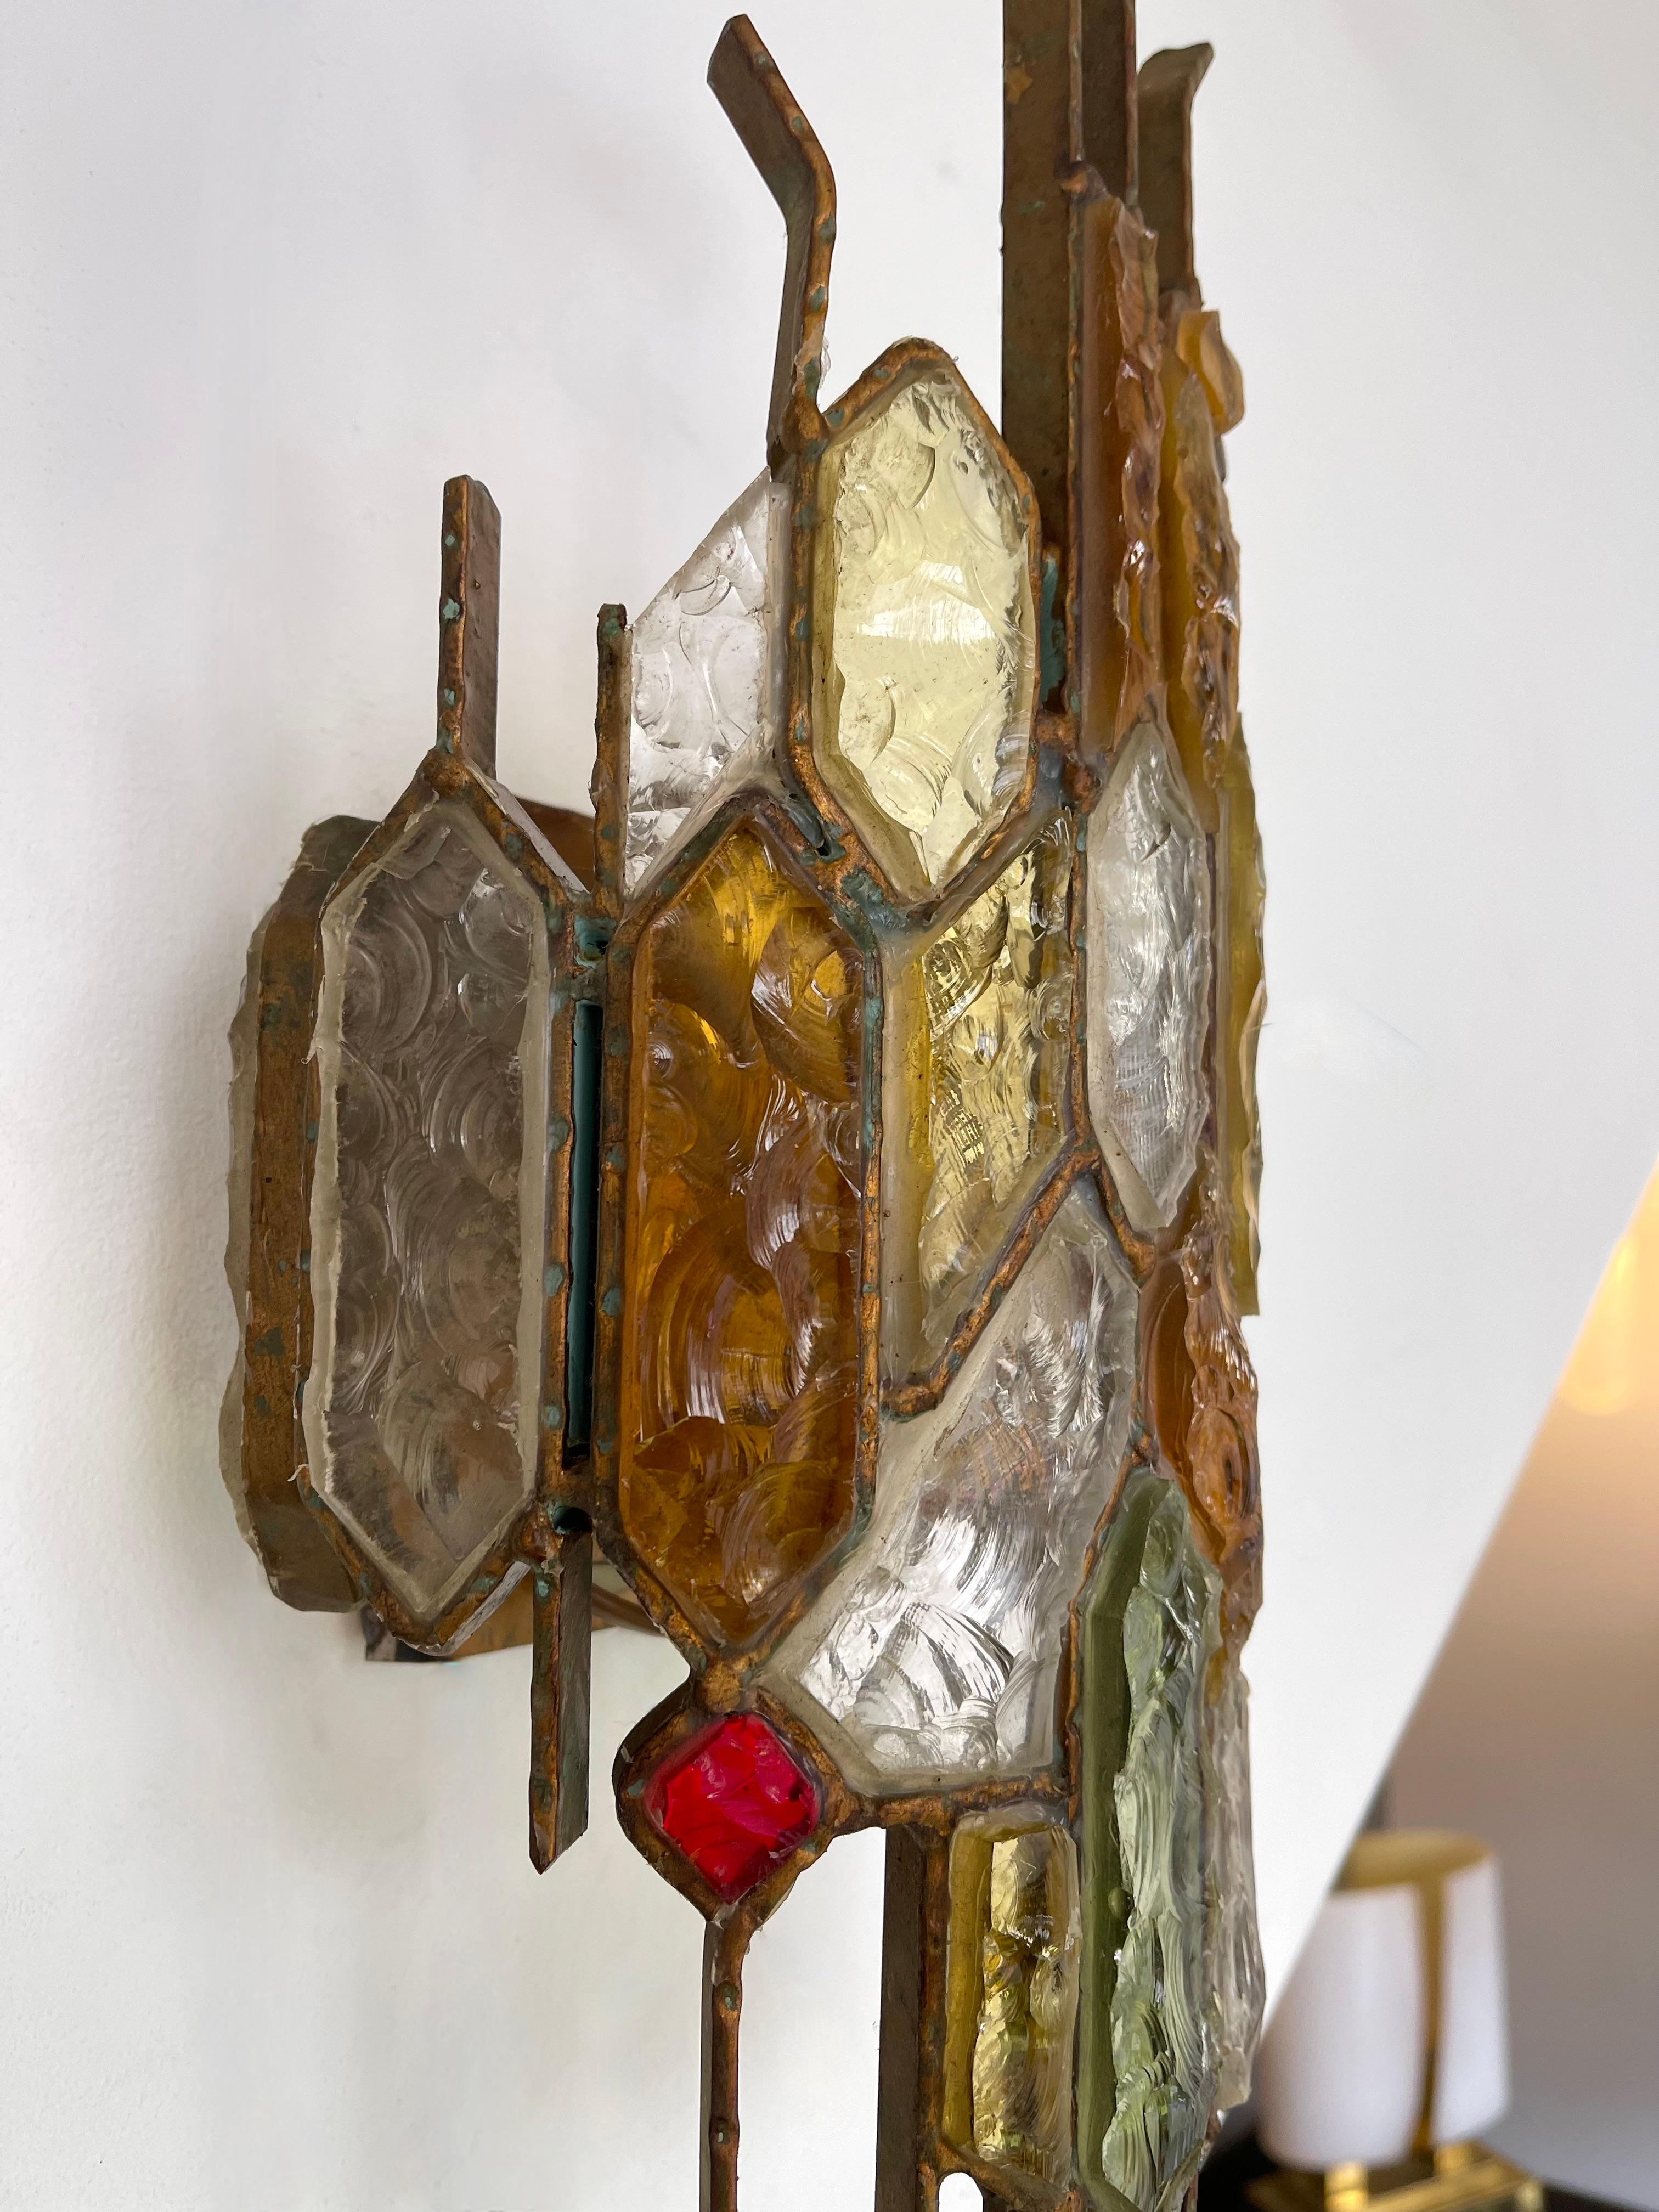 Pair of Hammered Glass Wrought Iron Sconces by Longobard, Italy, 1970s For Sale 6